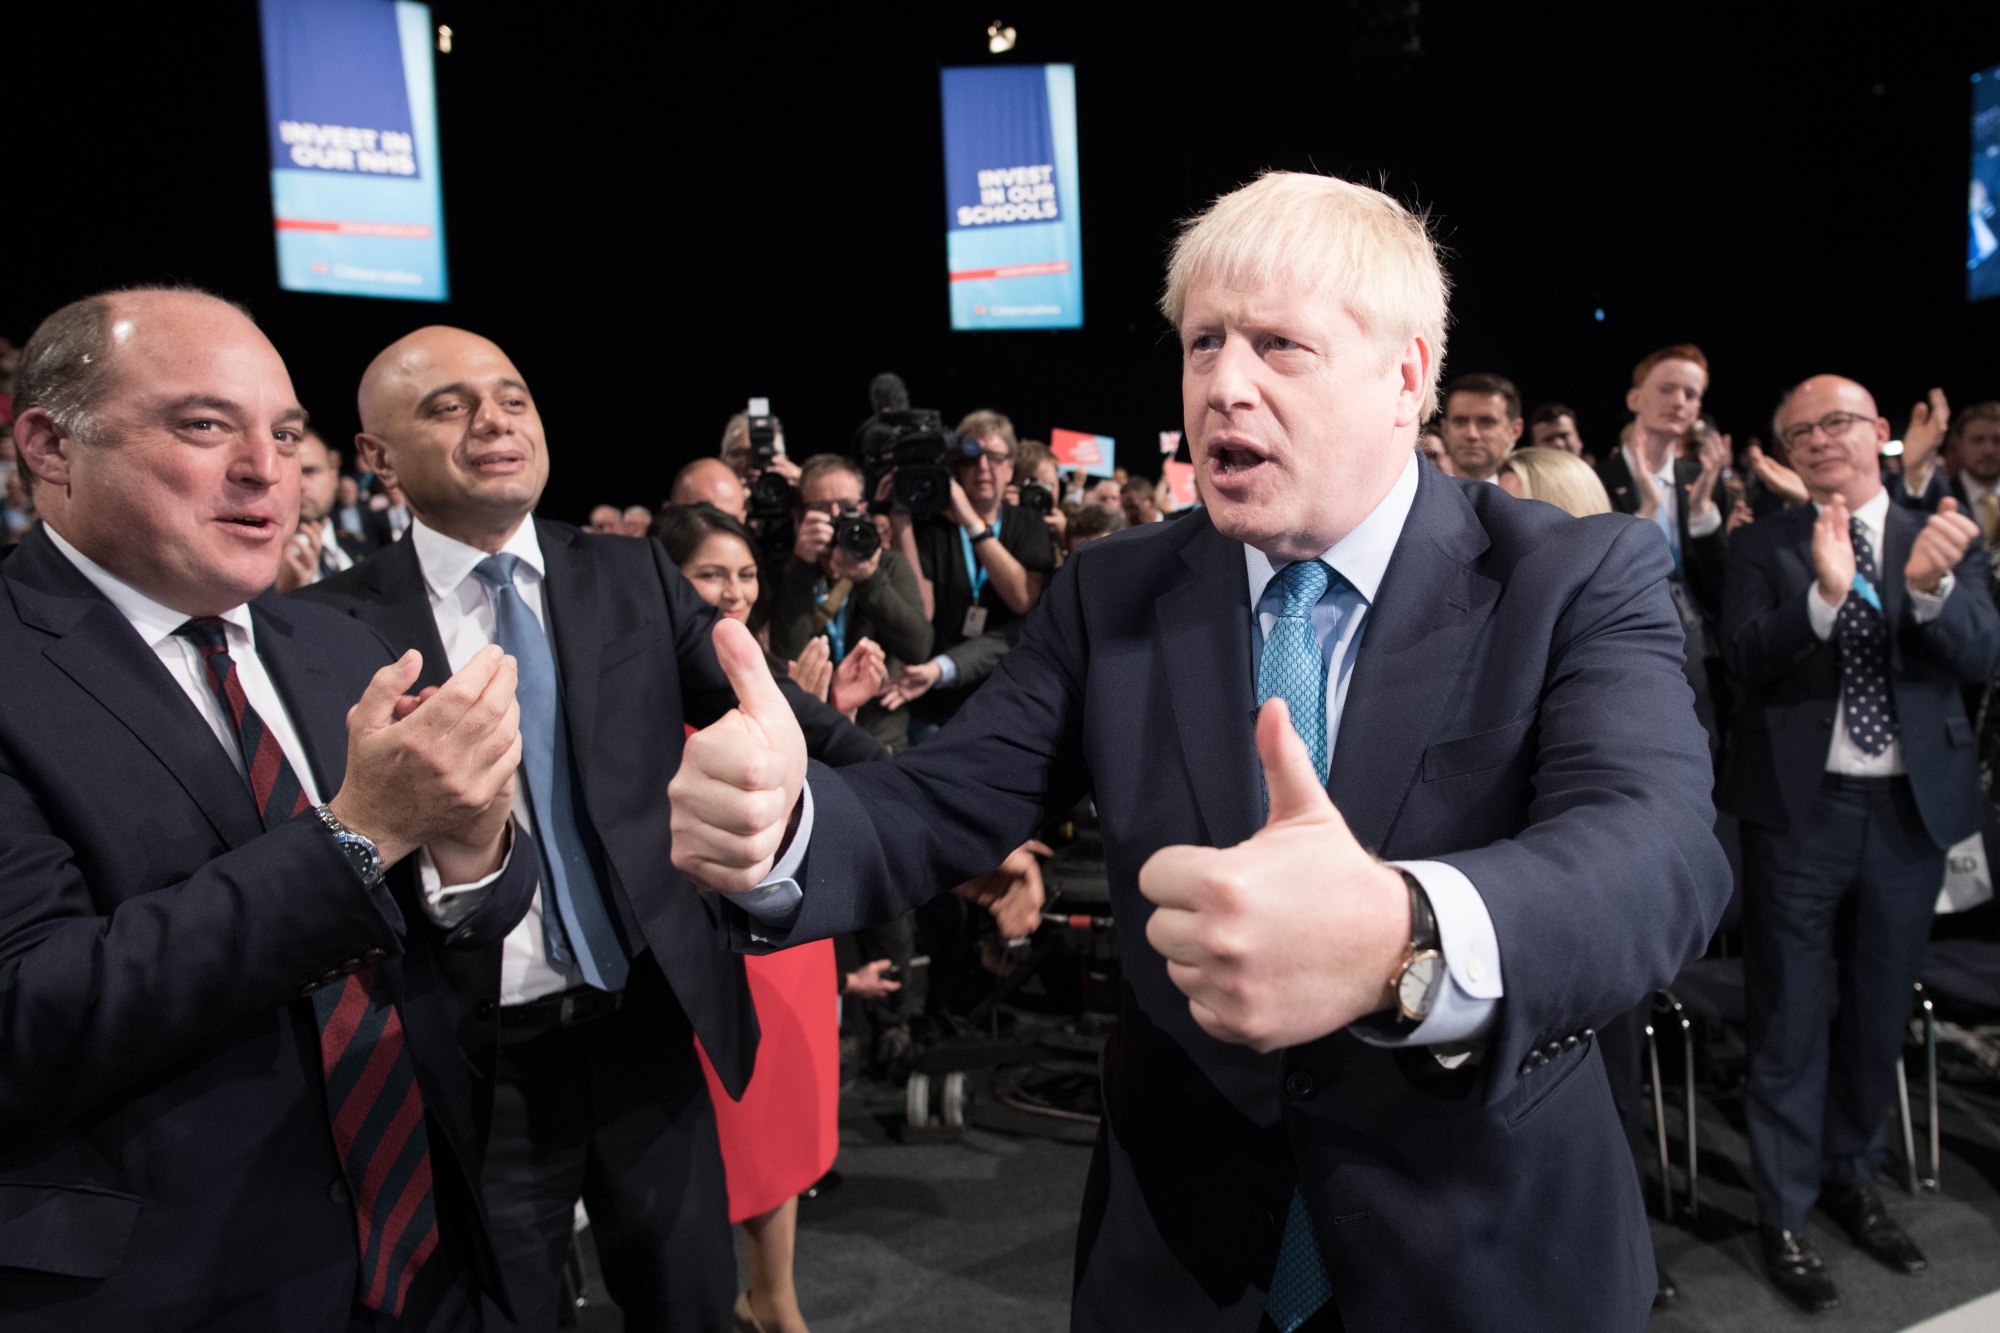 Boris Johnson gives a thumbs up after delivering a speech during the Conservative Party Conference in October.